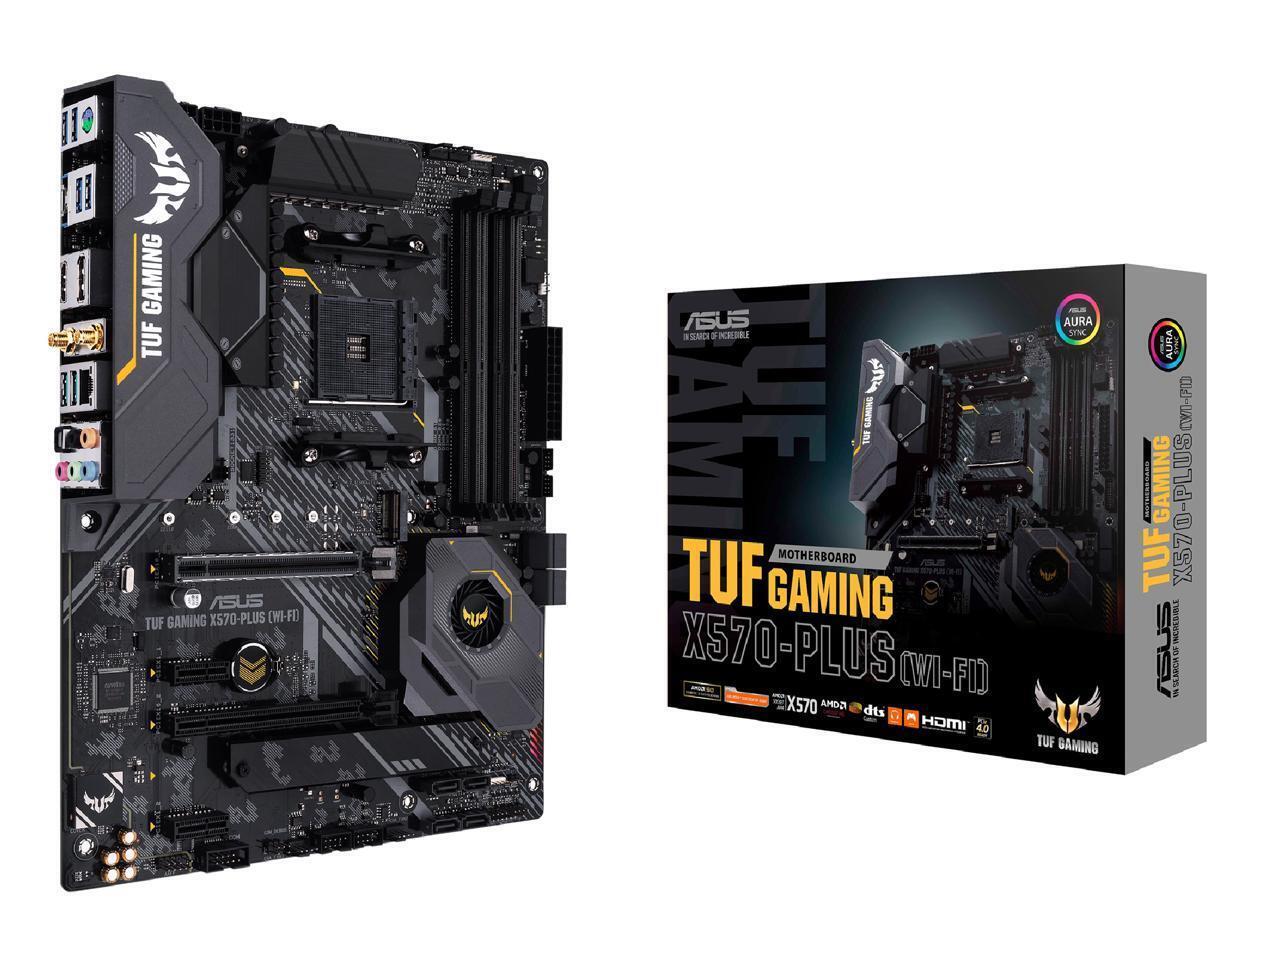 ASUS AM4 TUF Gaming X570-Plus (Wi-Fi) ATX Motherboard with PCIe 4.0, Dual M.2, 1